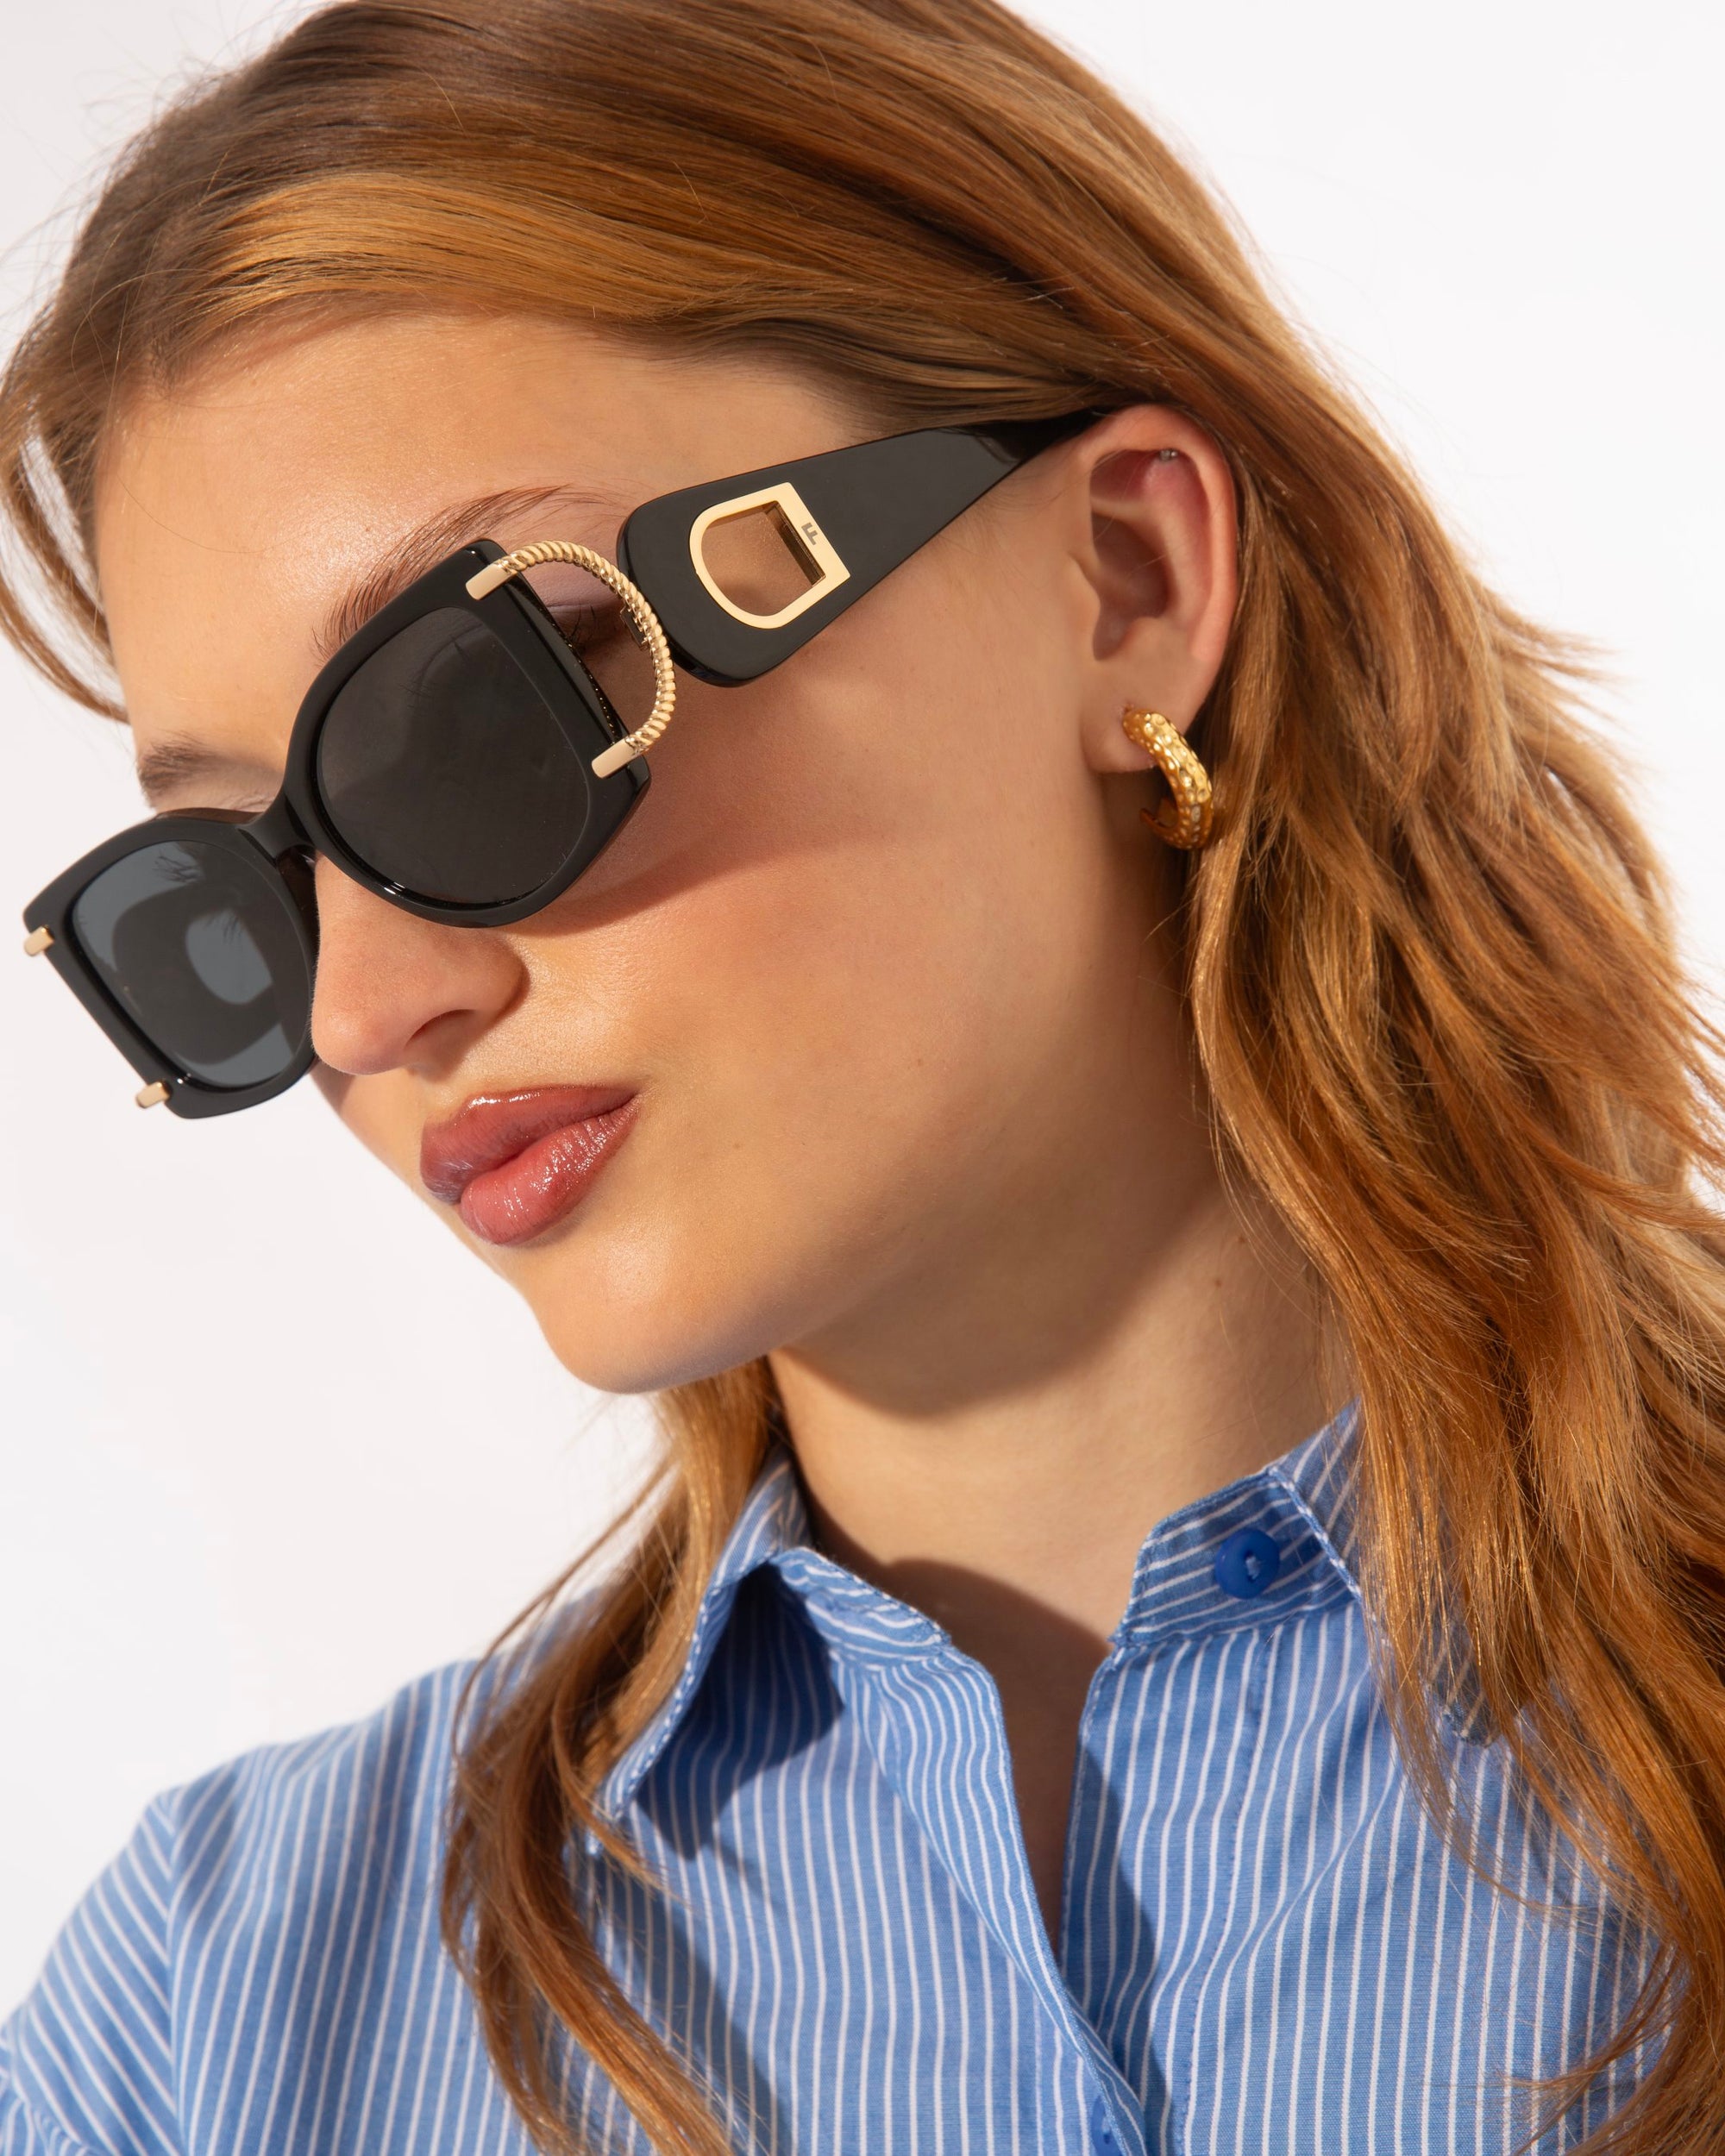 A person with long, wavy brown hair wears black, gold-plated For Art's Sake® Sculpture sunglasses with UV protection and a blue and white striped shirt. They also sport a gold hoop earring, and their head is tilted slightly to the left. The background is plain white.